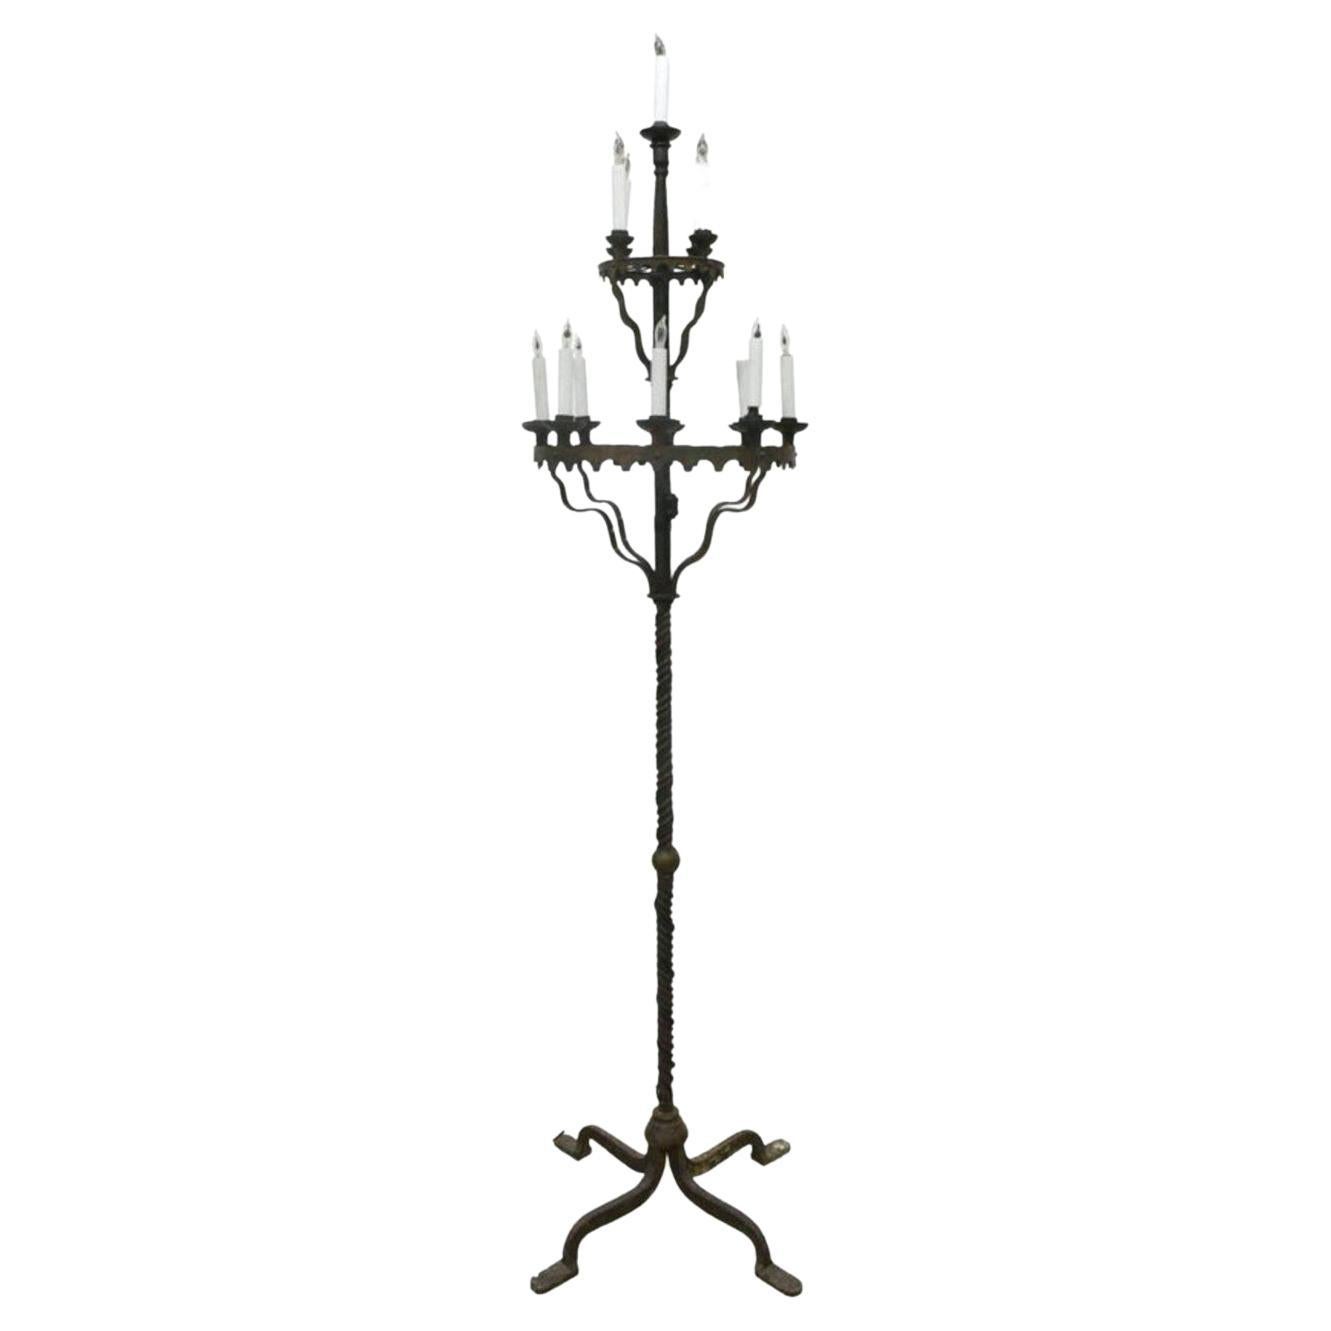 19th Century French Gothic Revival Wrought Iron Candelabra 